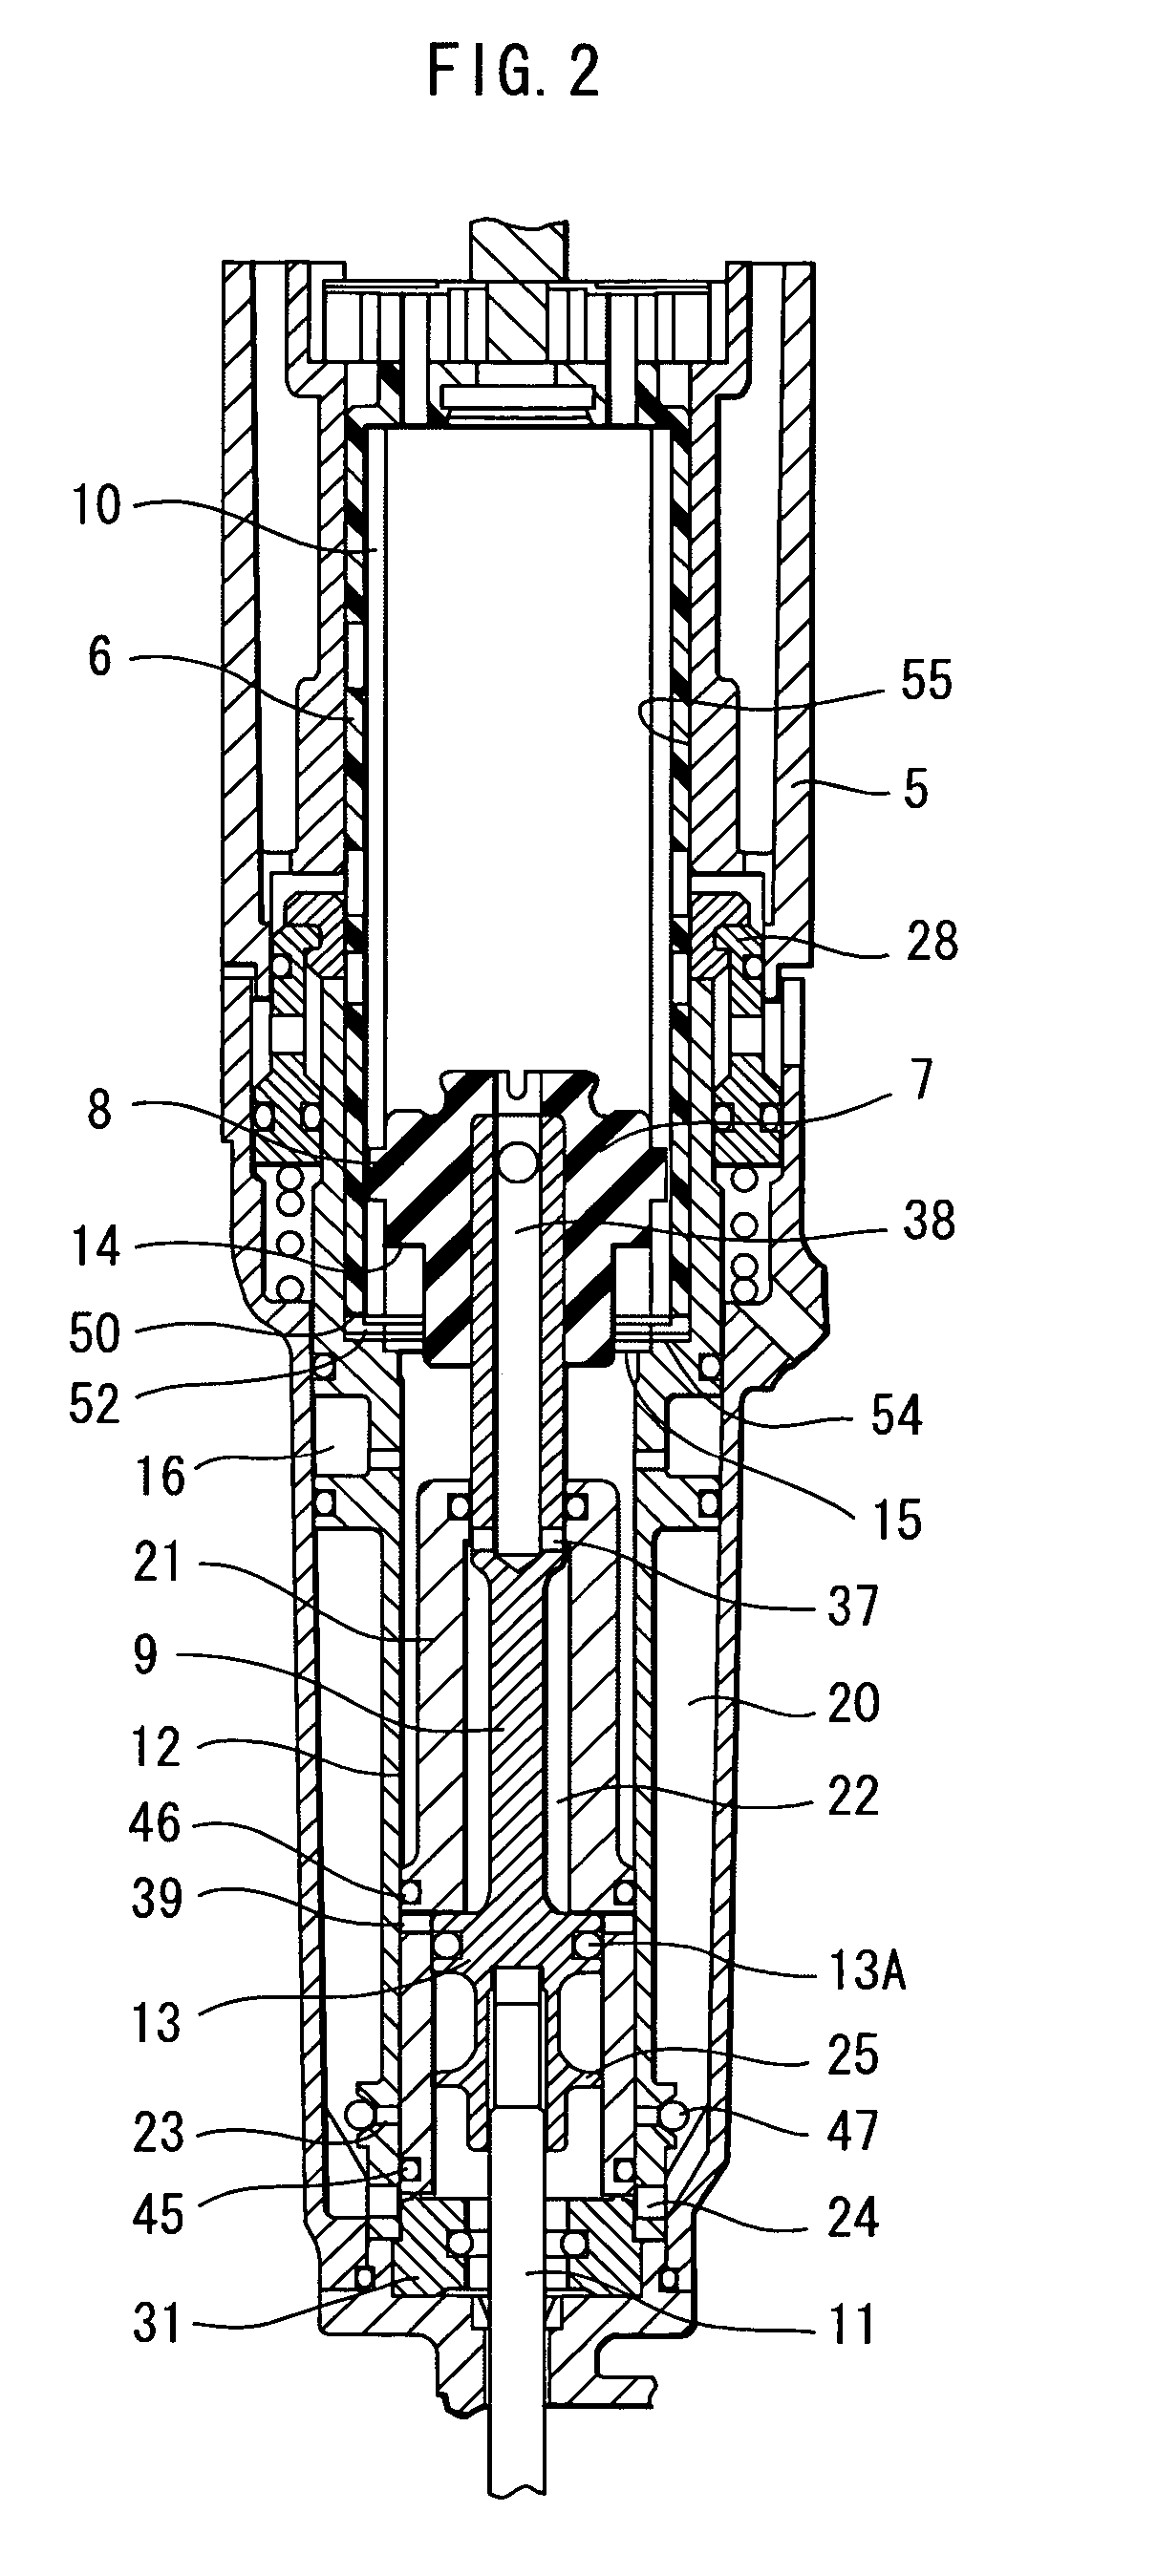 Pneumatically operated screw driver